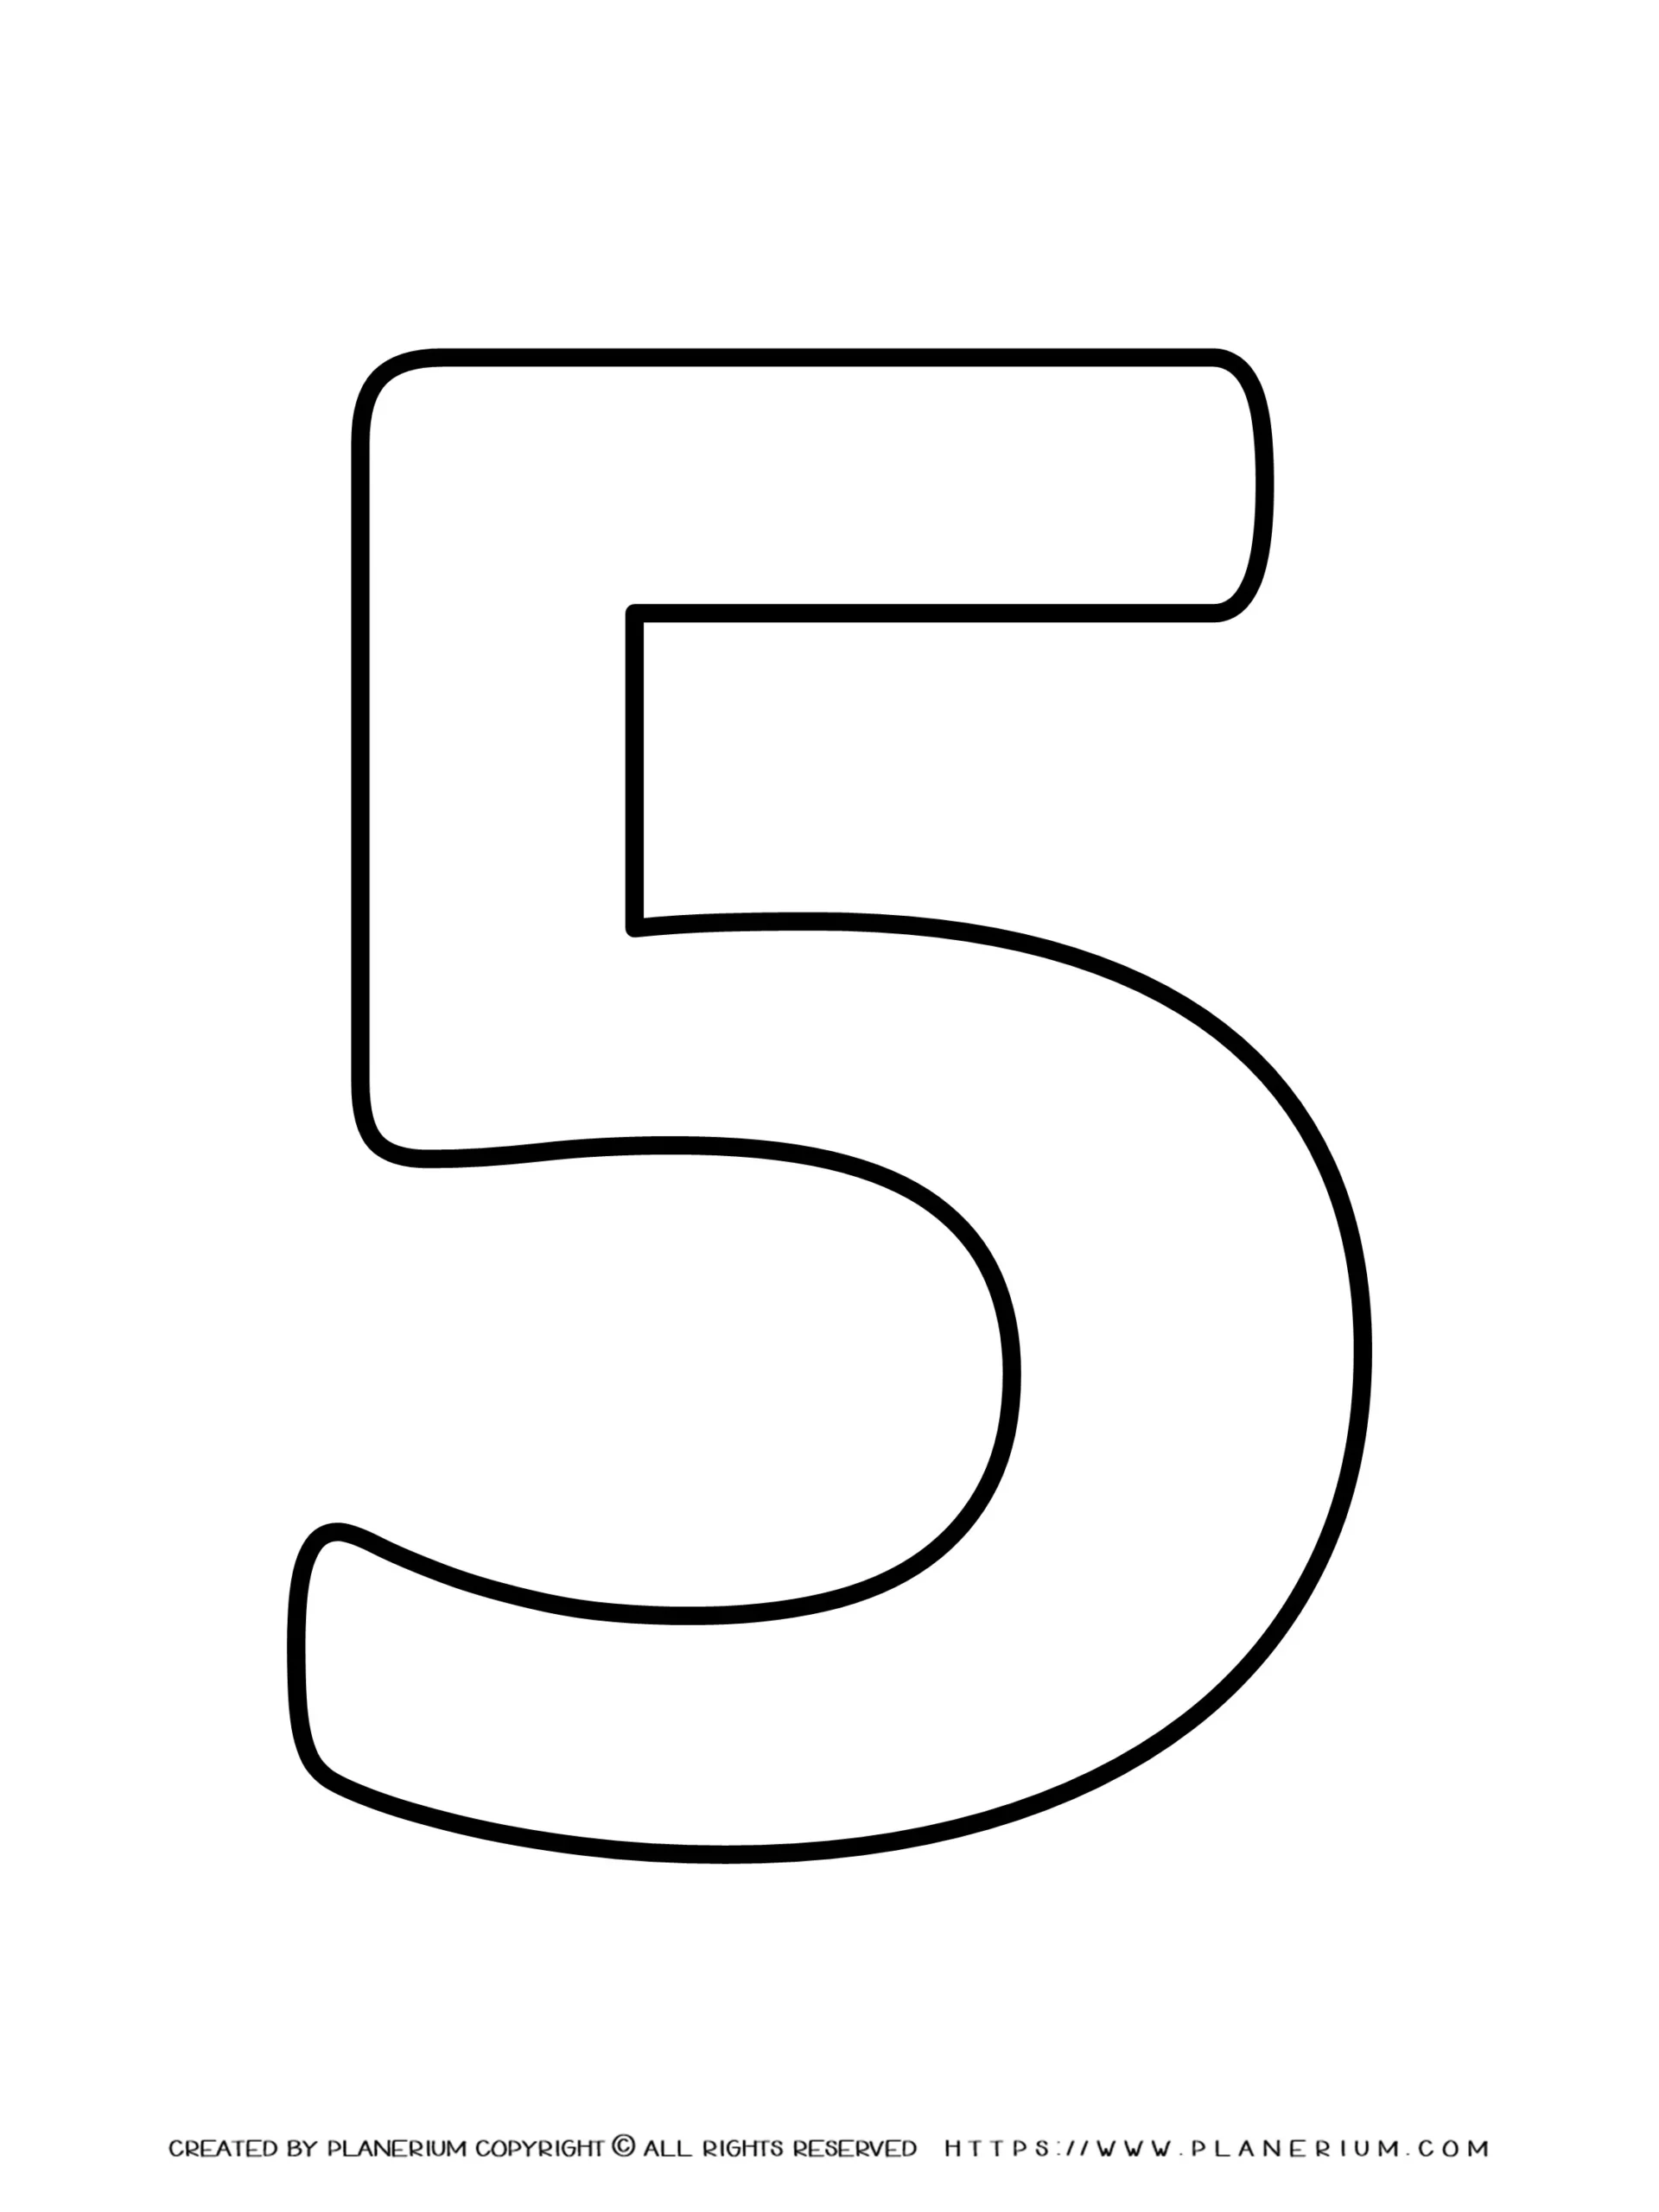 the number five